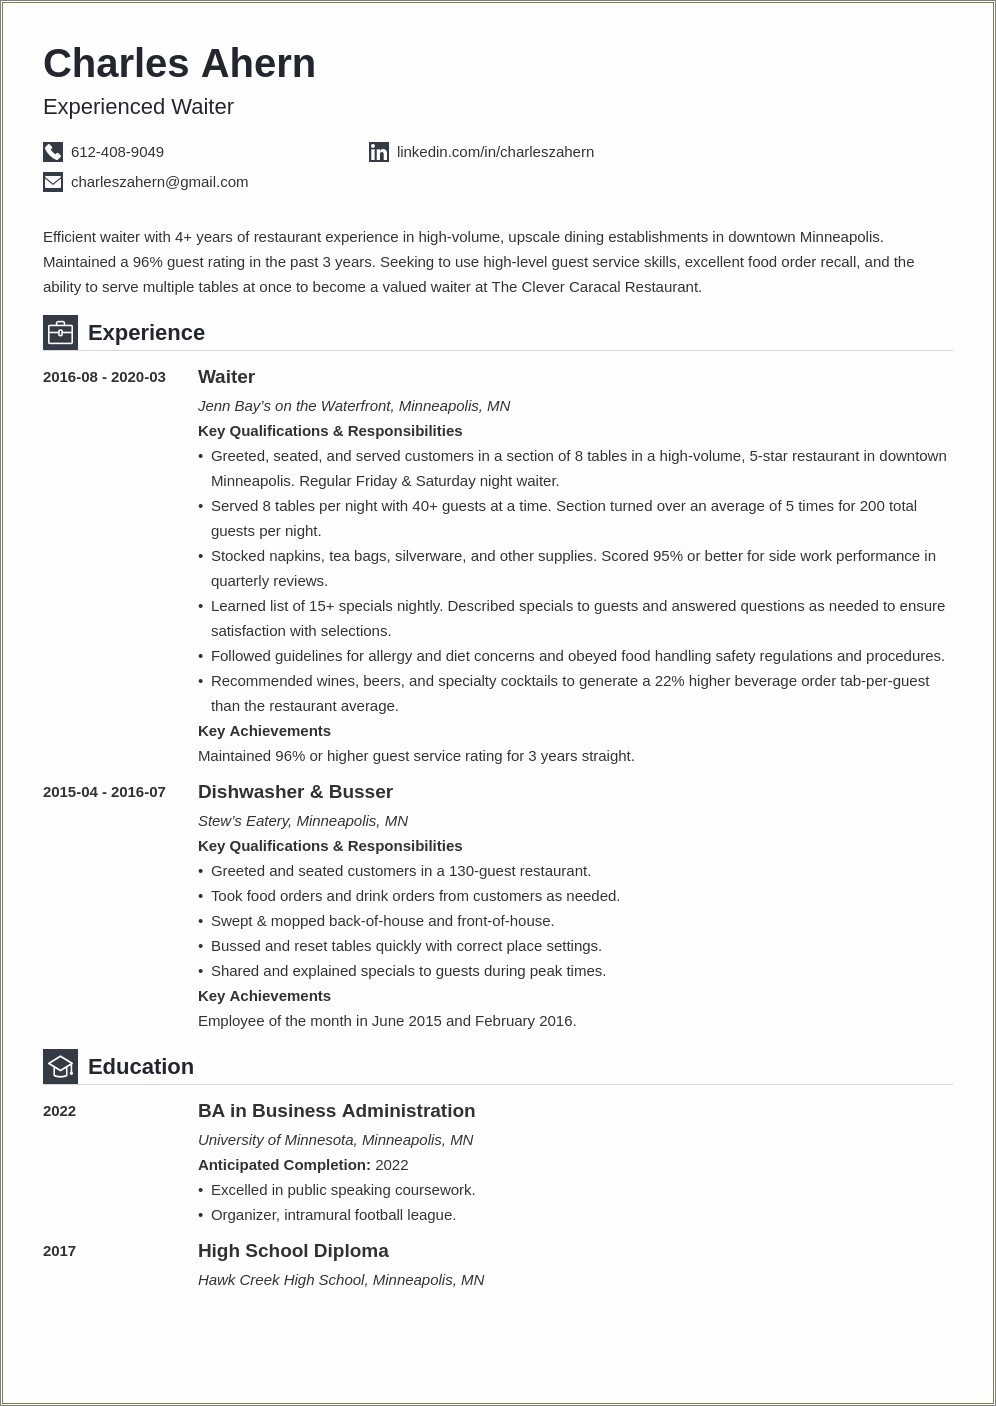 Resume For Admin Work With Restaurant Expereince